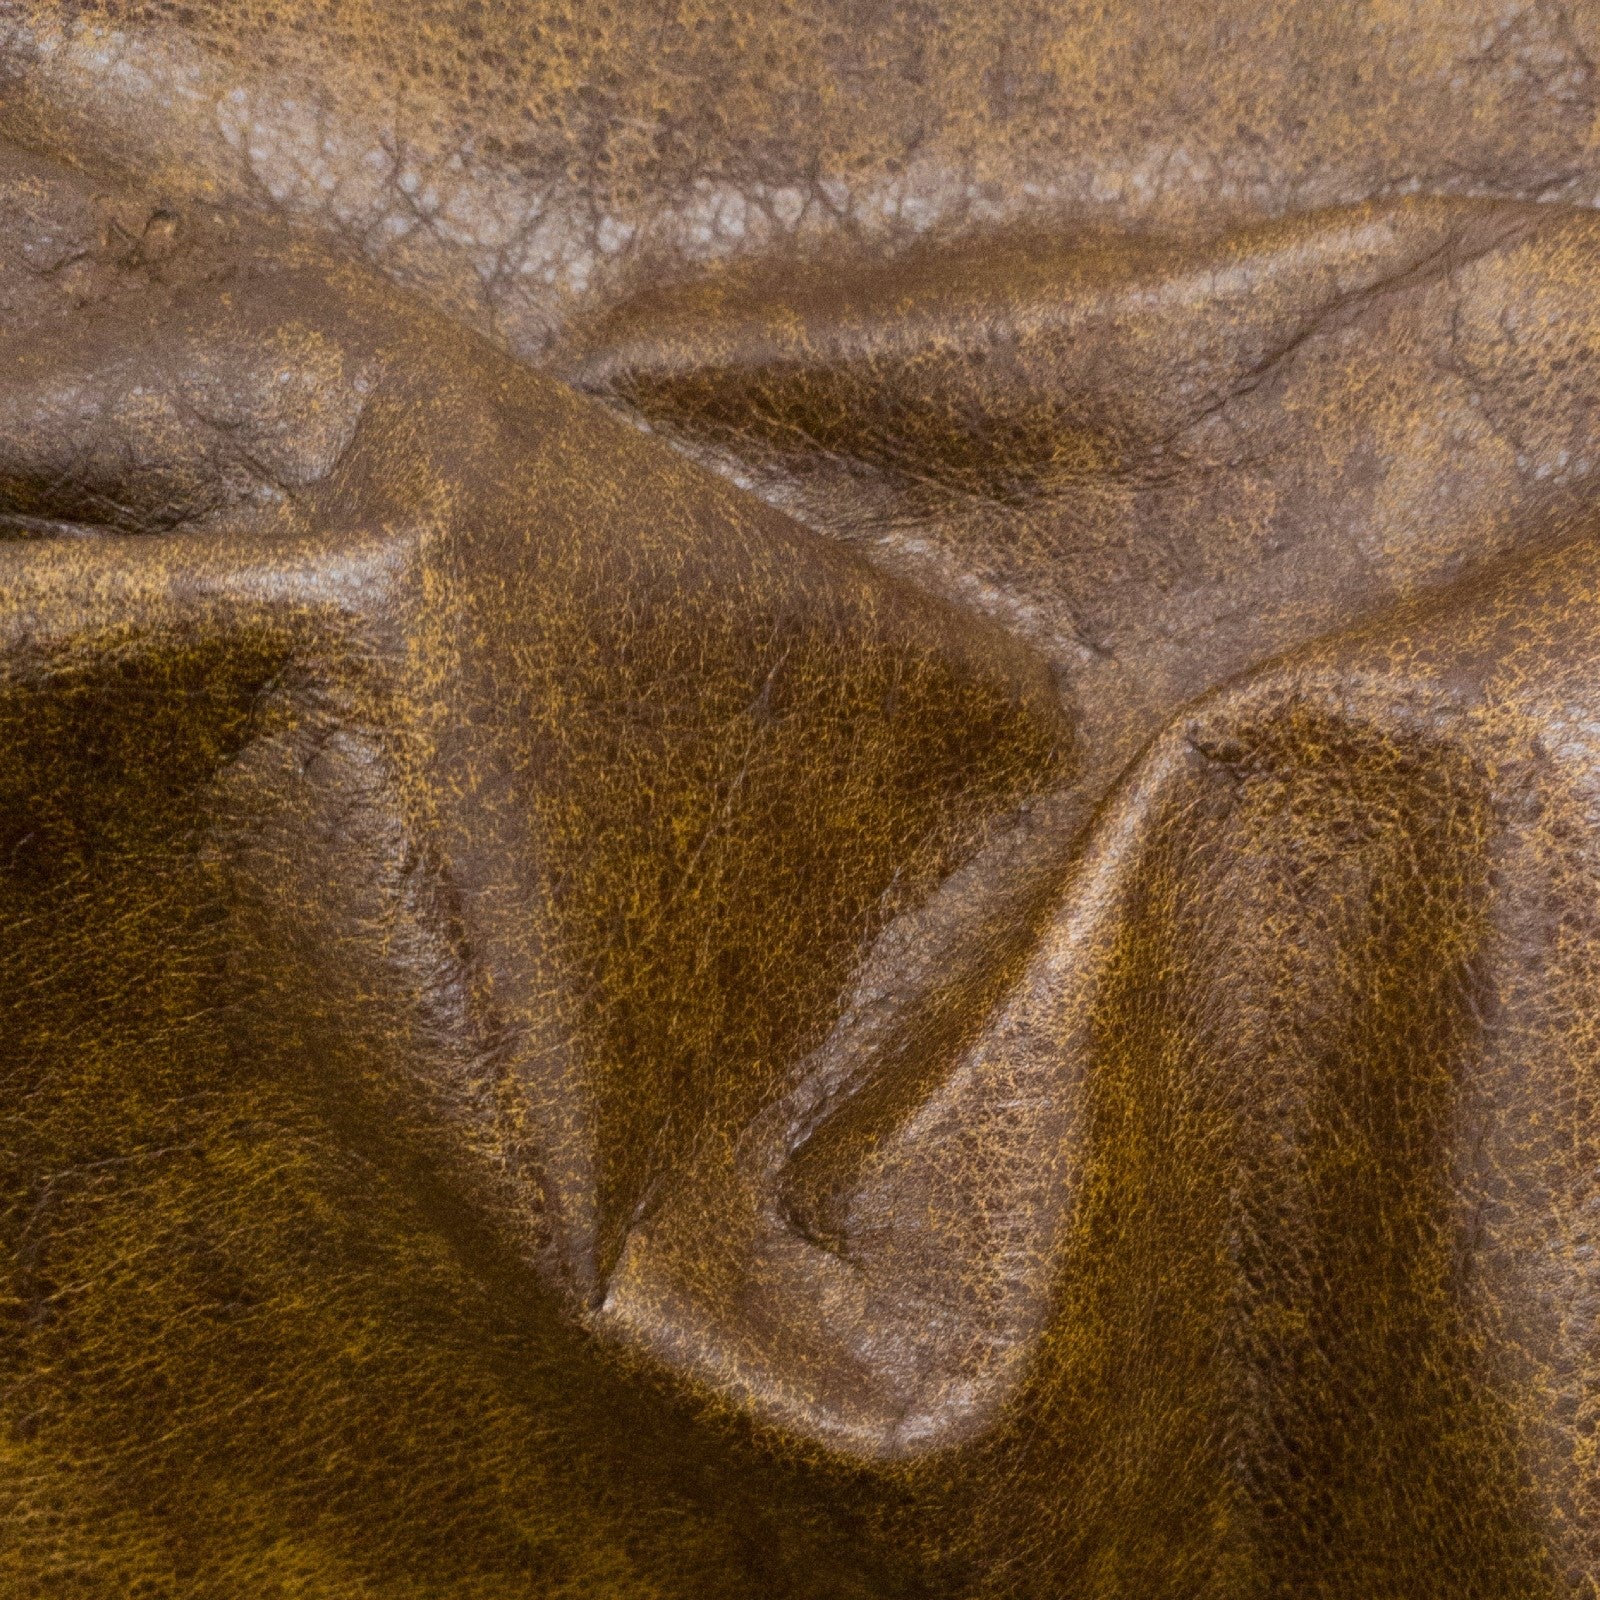 Light-Medium Brown, 2-4 oz, 3-10 Sq Ft, Upholstery Cow Project Pieces, Moss Brown (2-3oz) / 7-10 Sq Ft | The Leather Guy